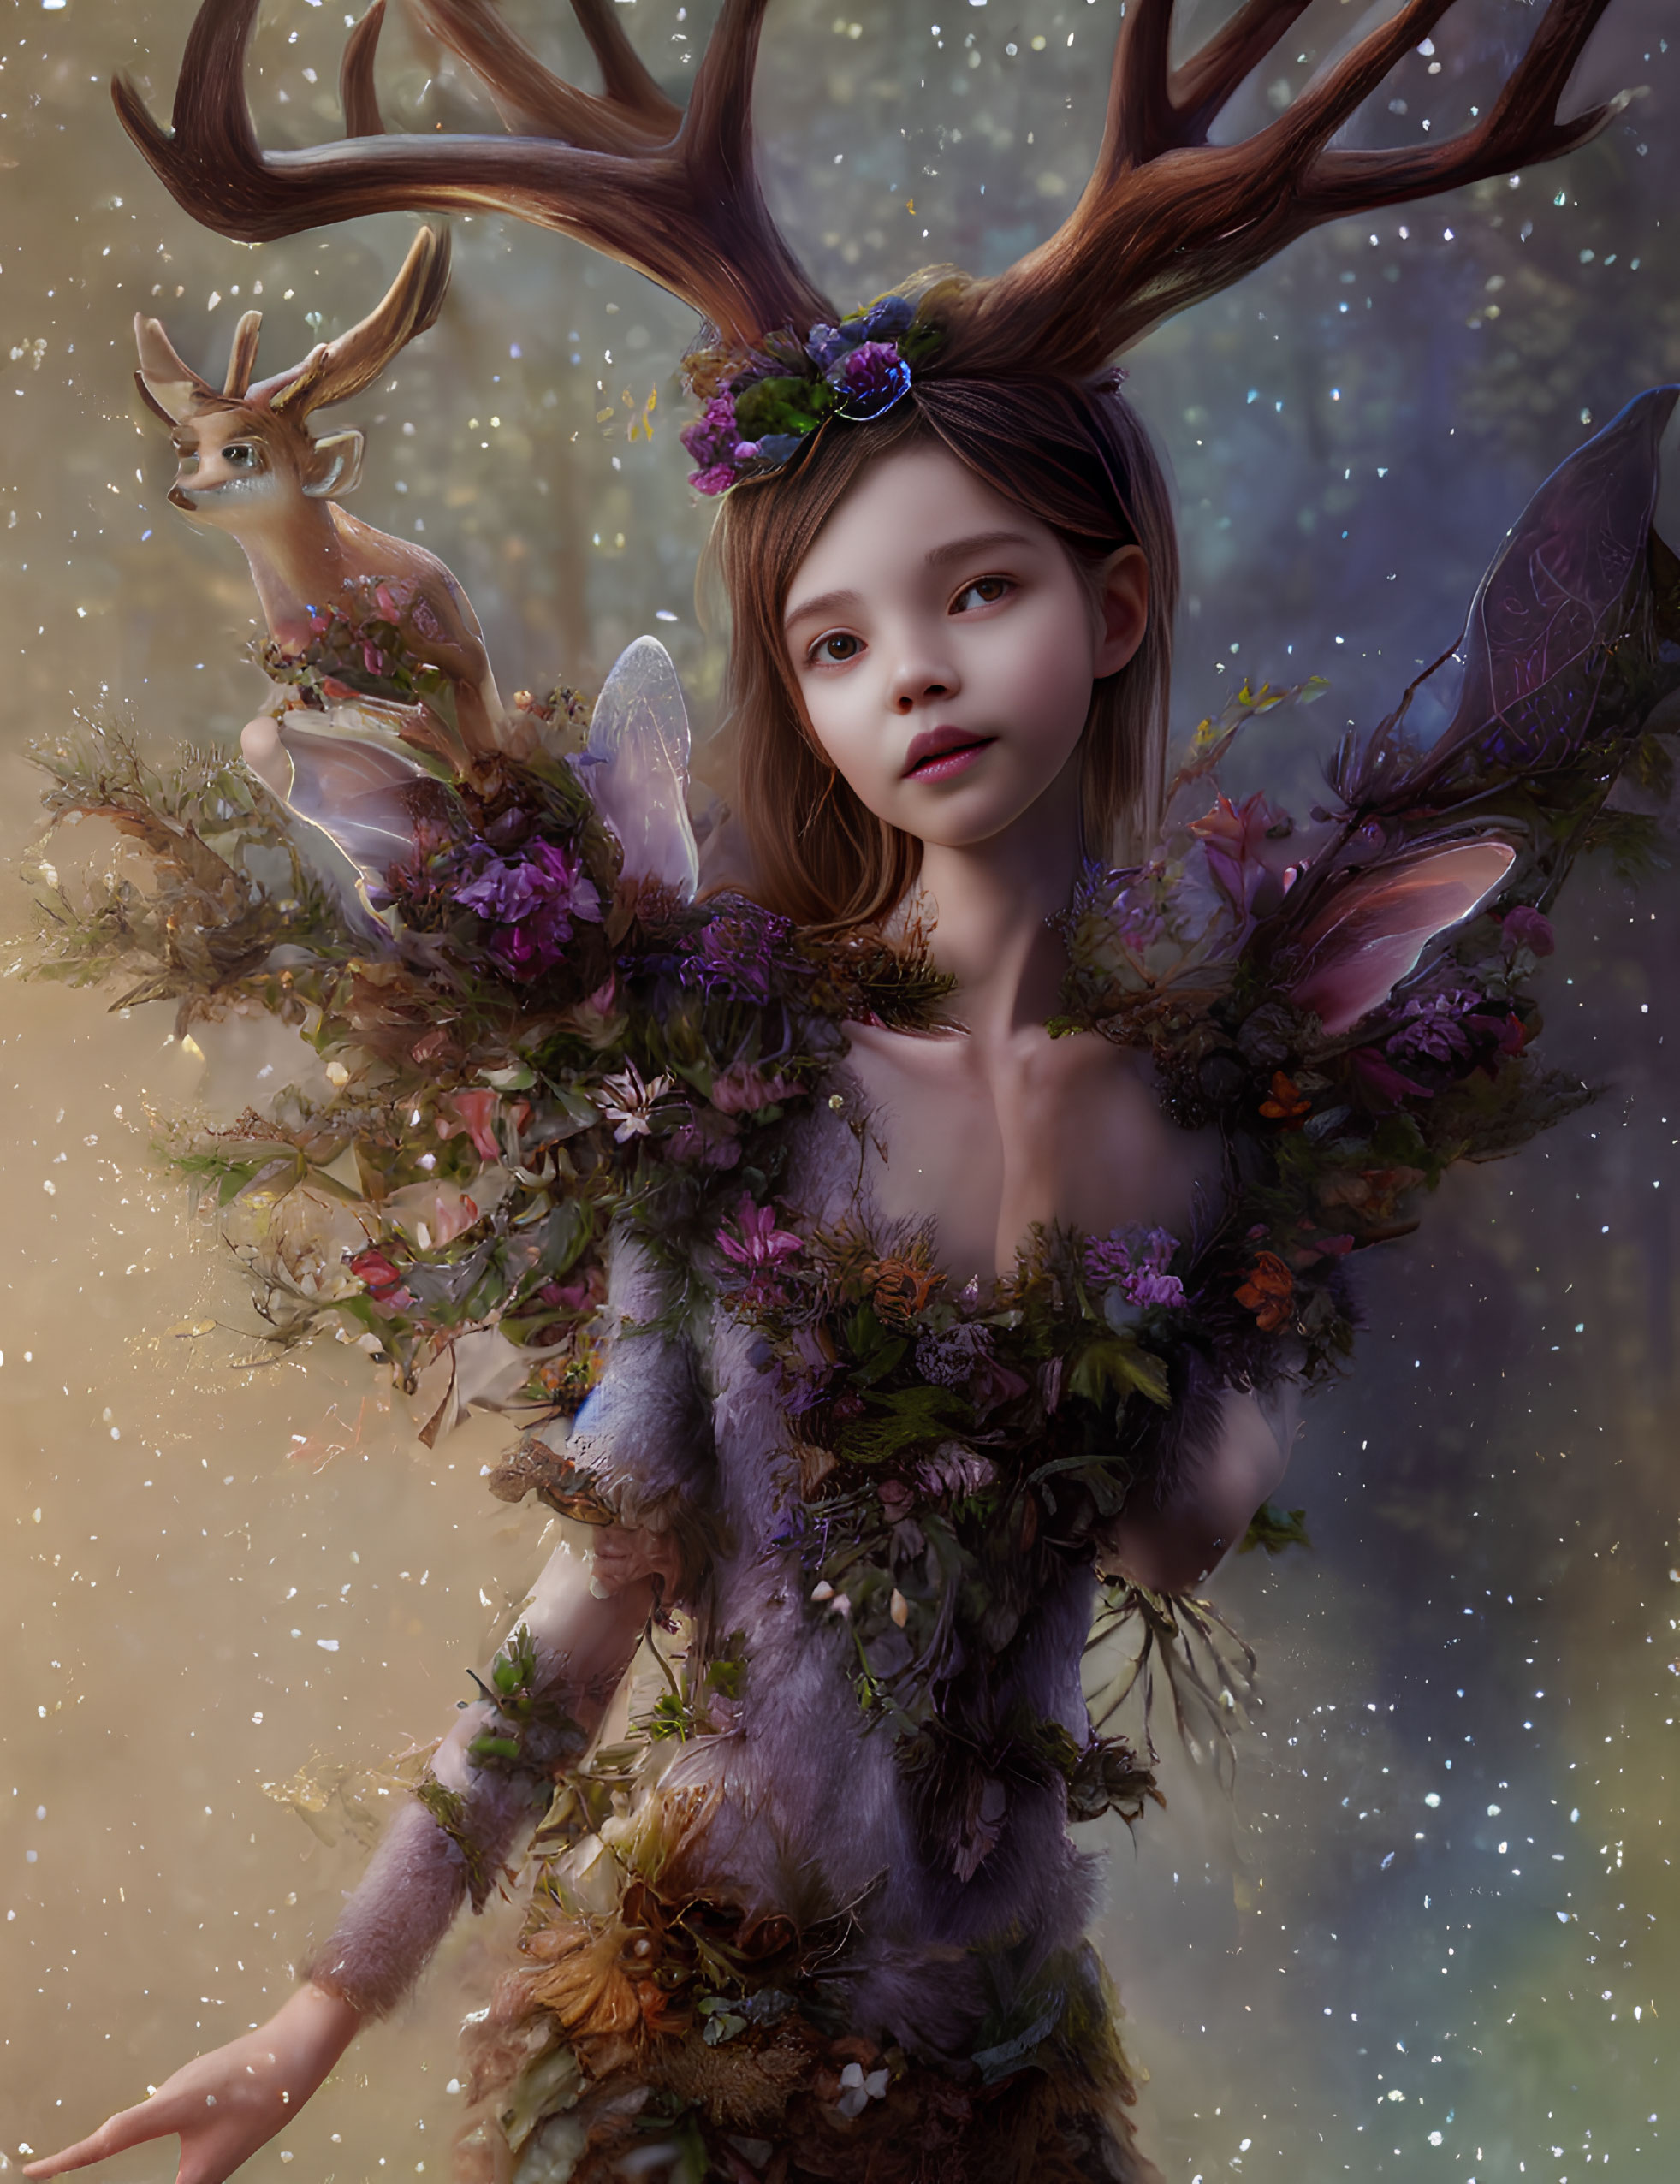 Child with Antlers, Fairy Wings, and Deer in Enchanted Scene